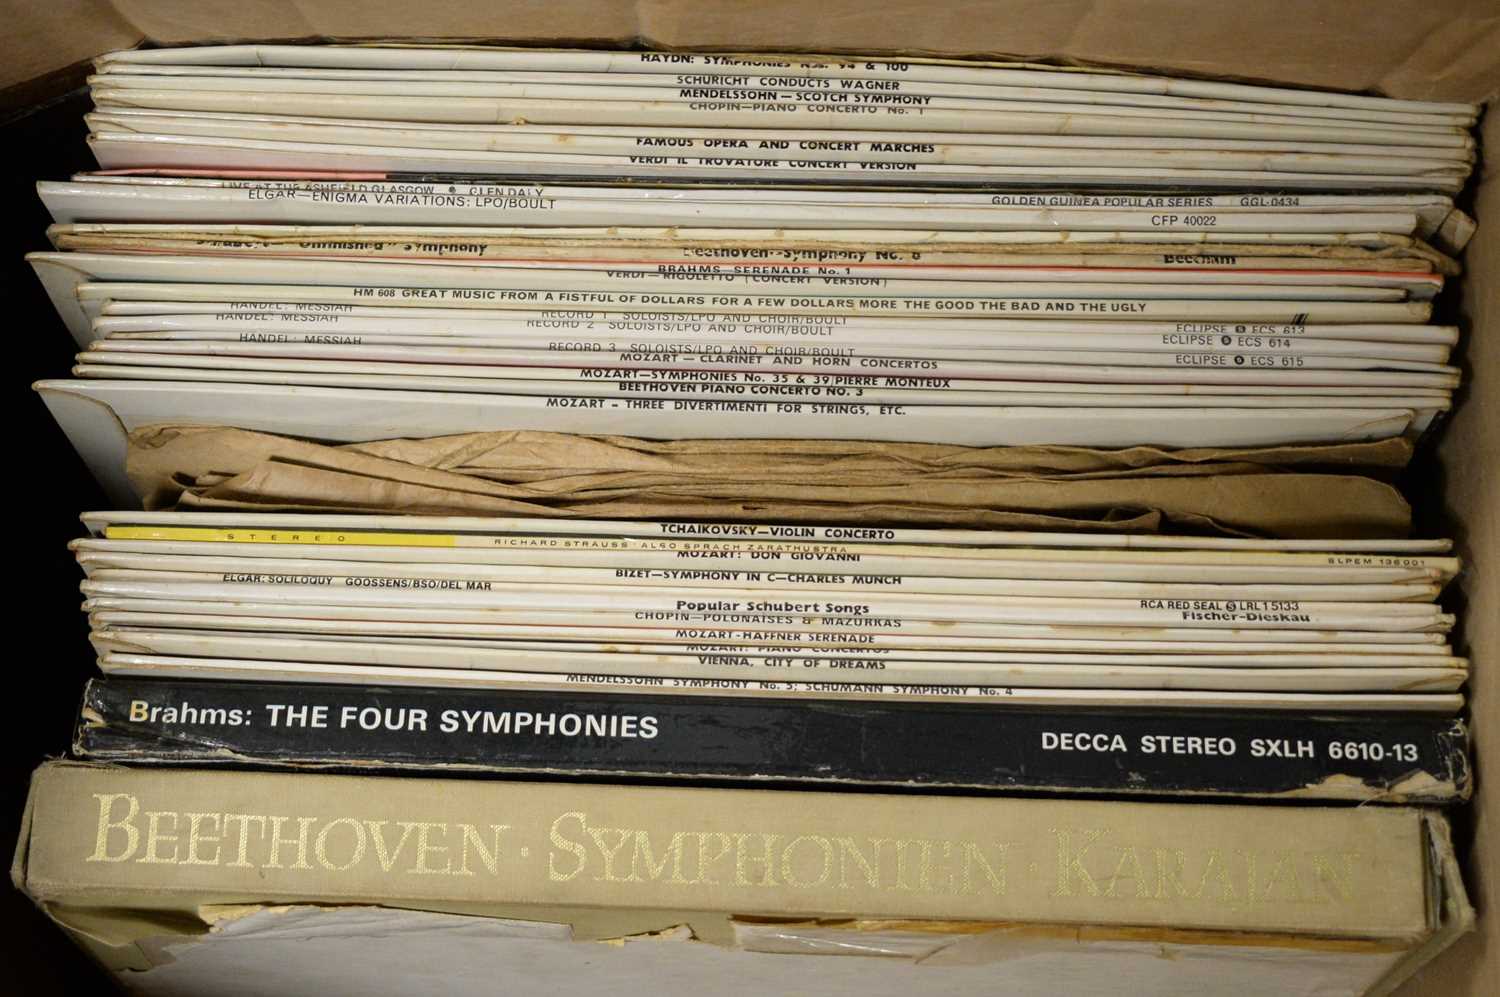 A selection of vinyl LPs.